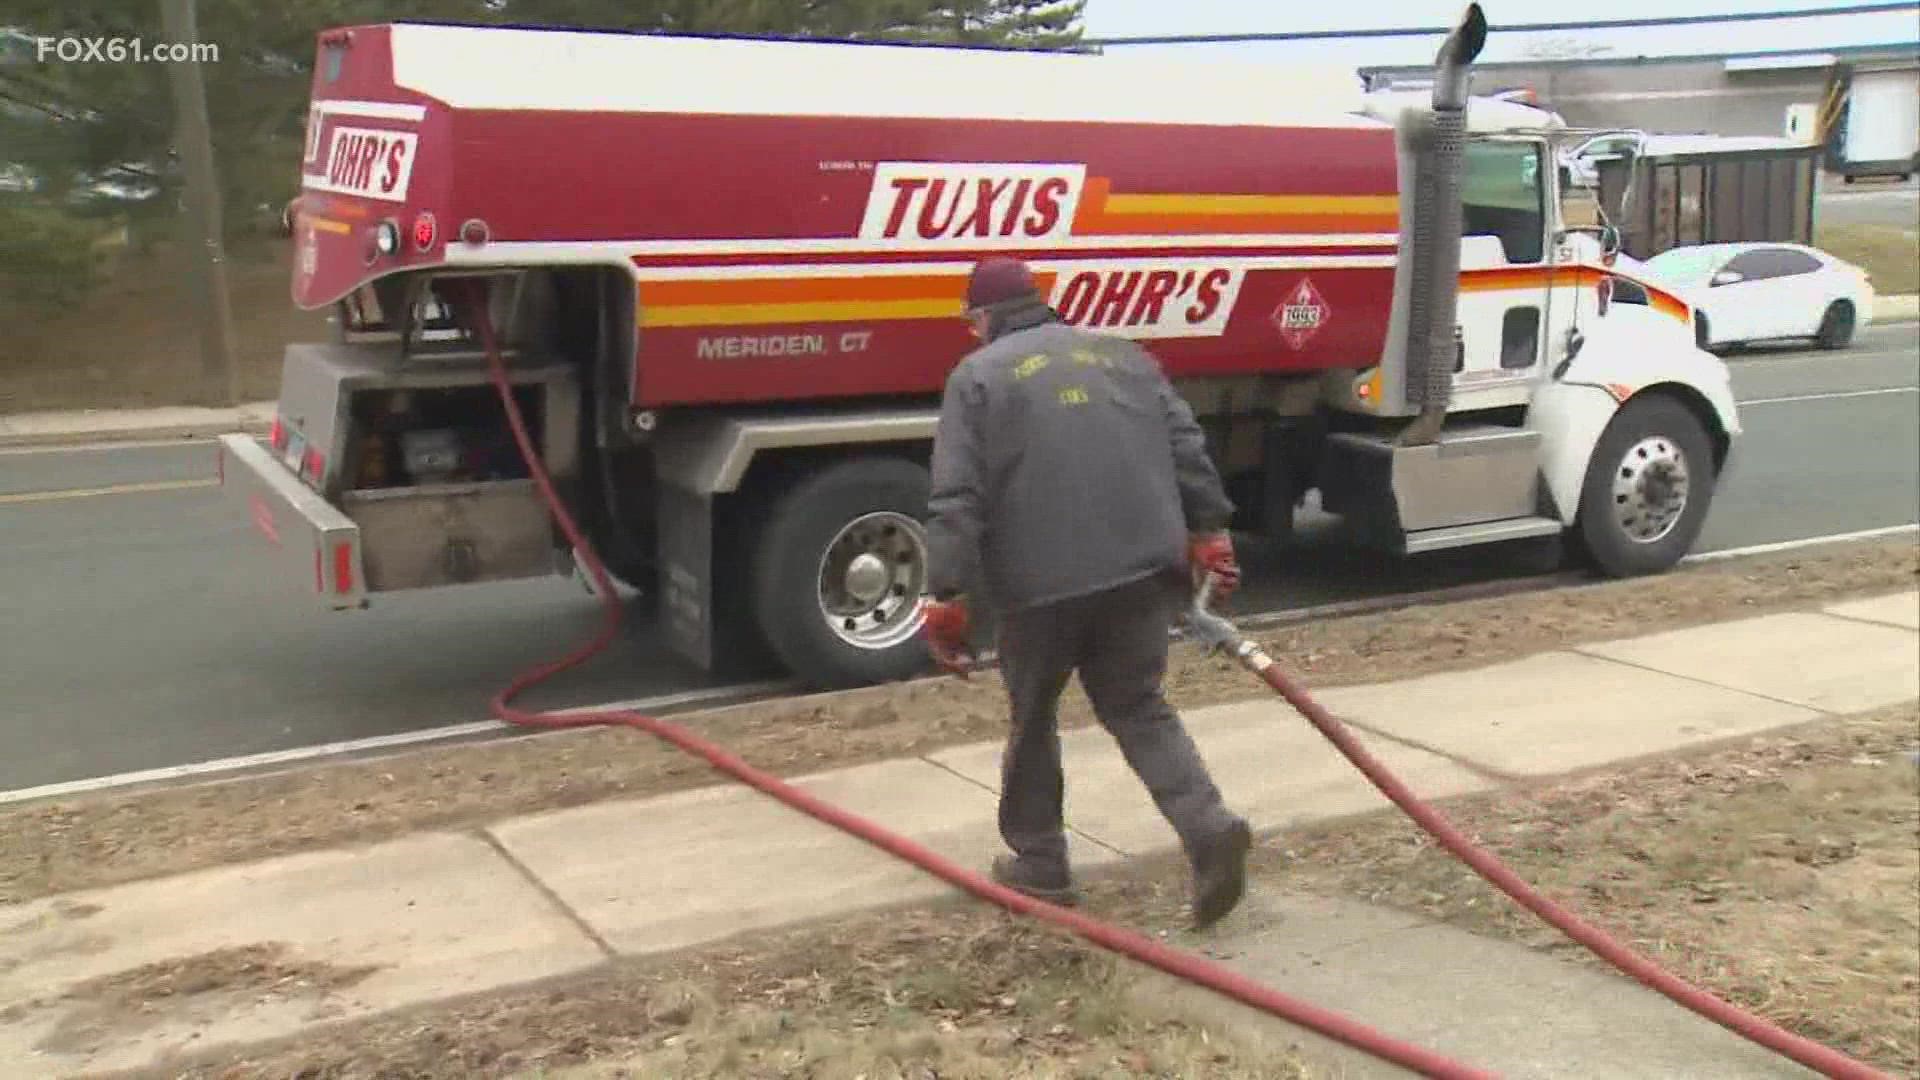 About 20% of home heating oil customers lock in their price for the season